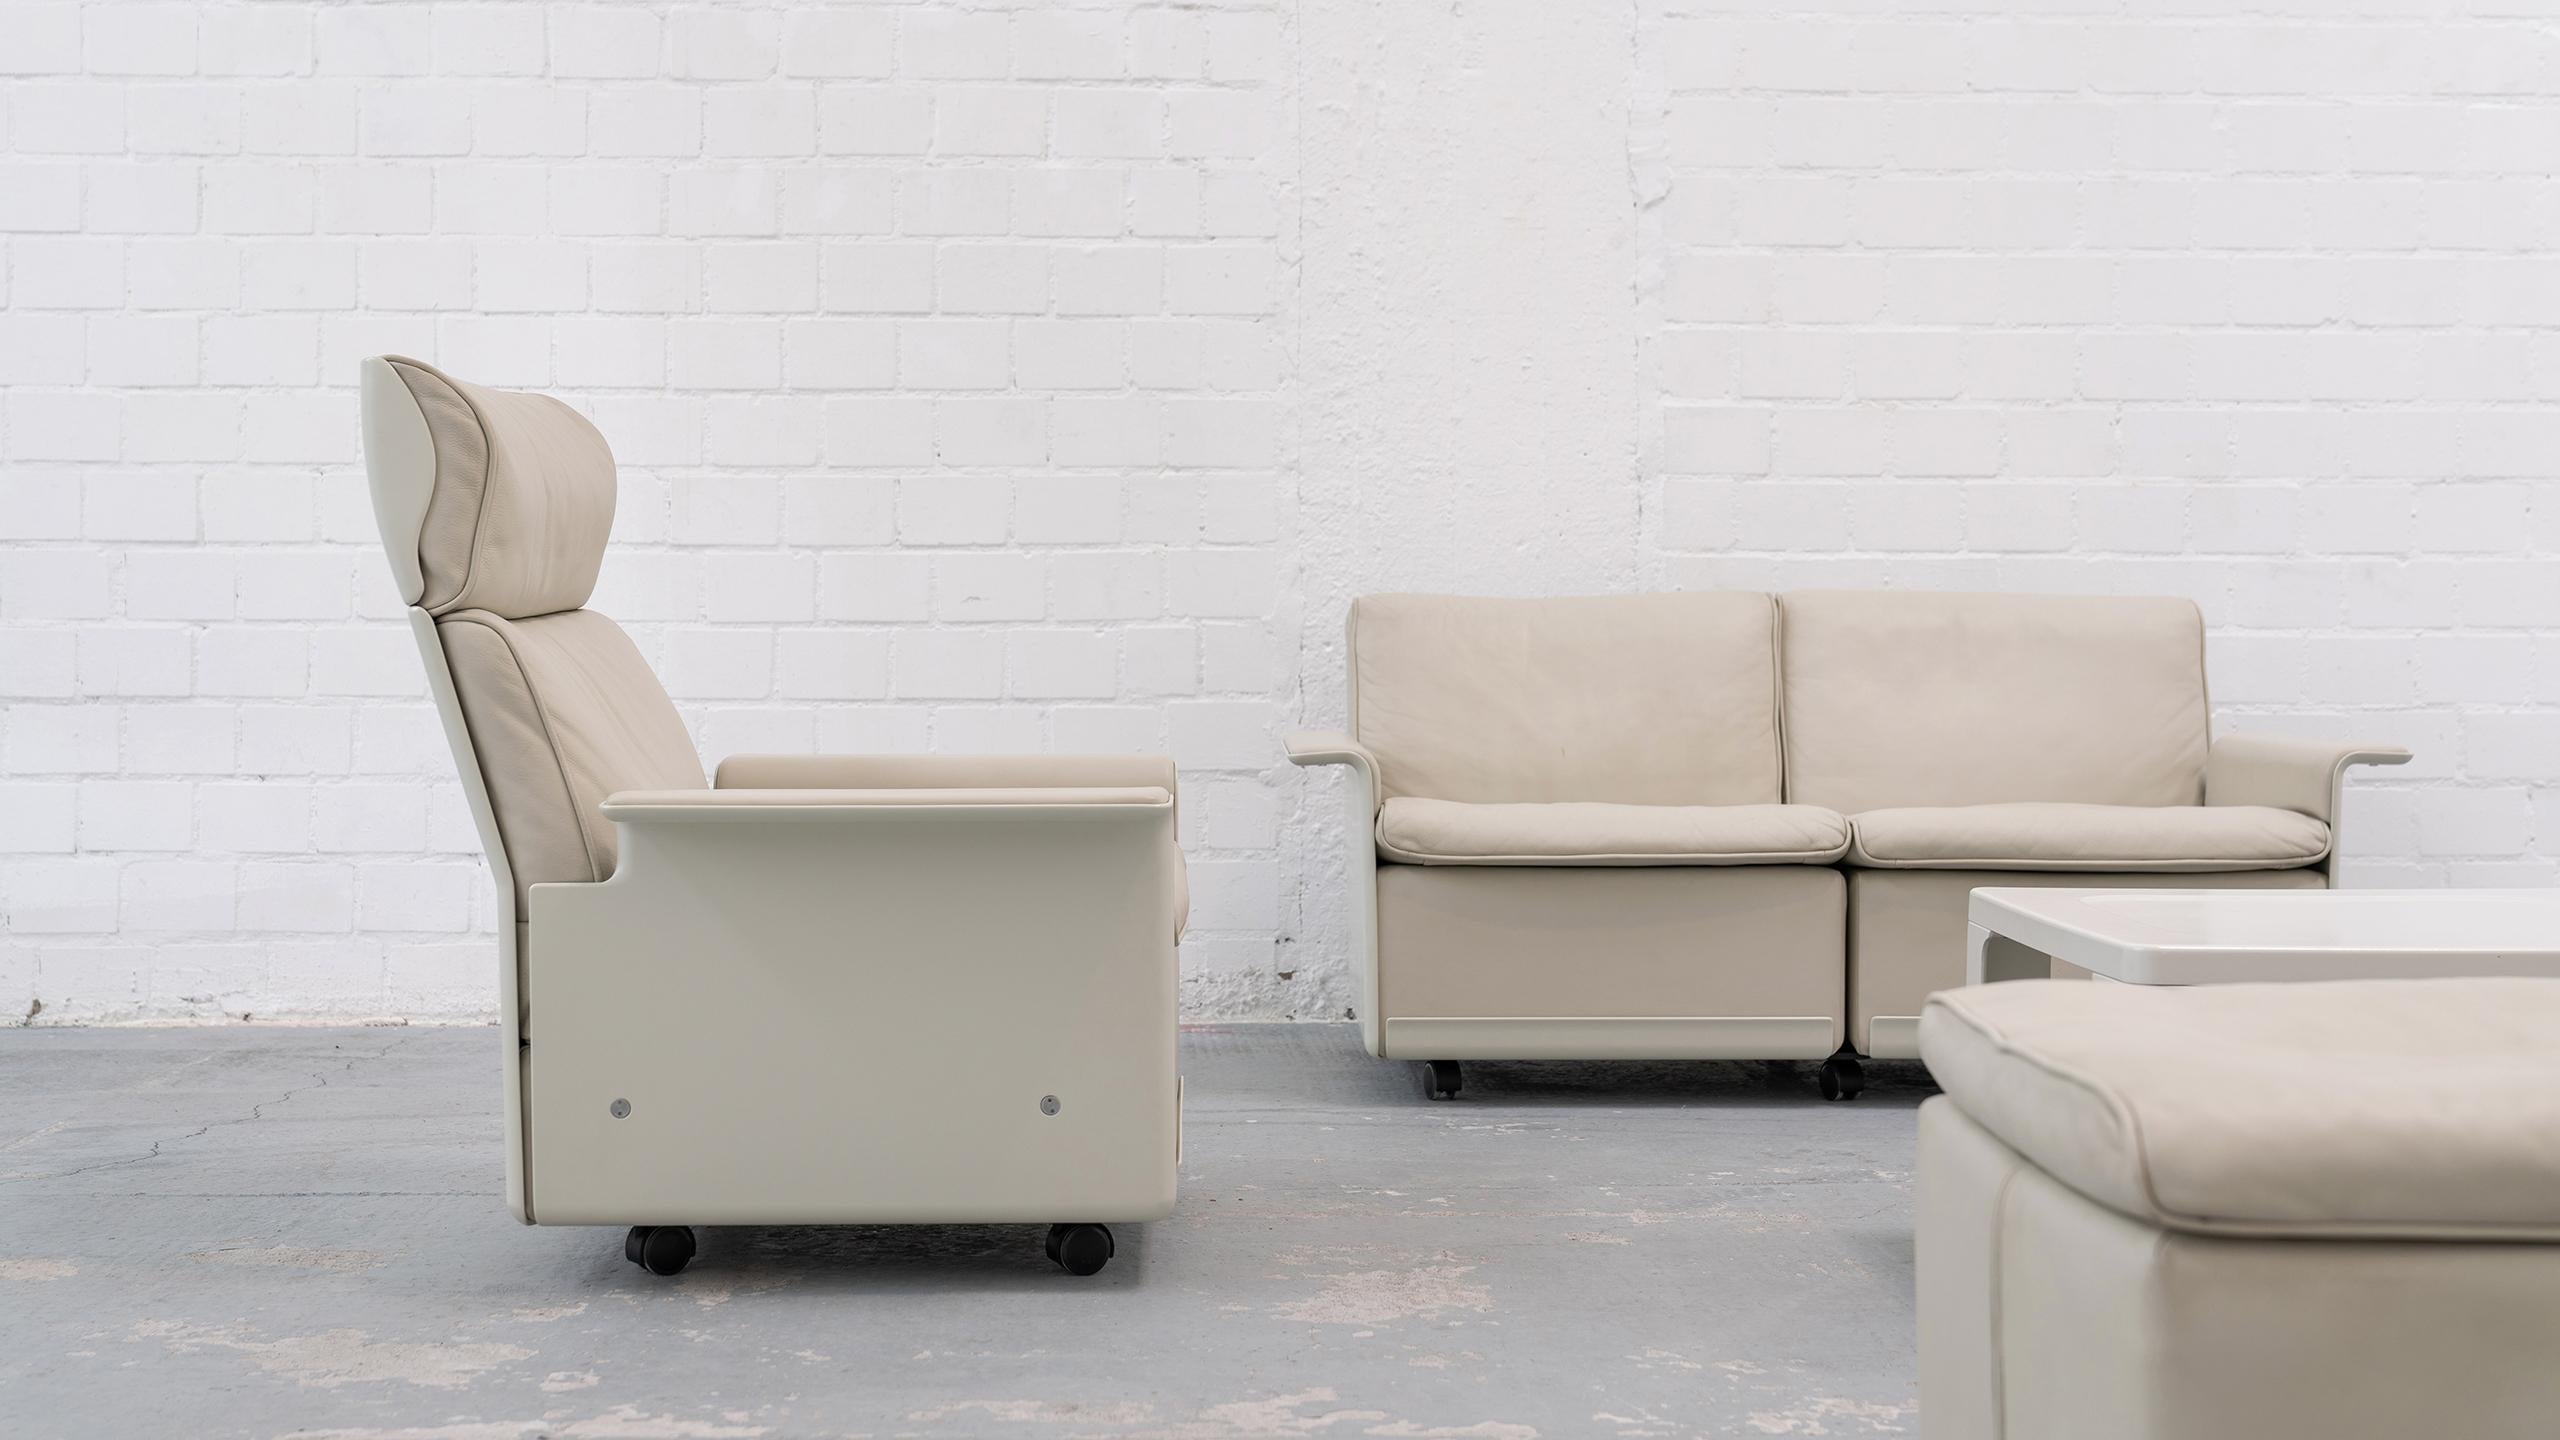 Dieter Rams, Lounge Chair & Ottoman Rz 620 by Vitsœ, Cream-Coloured Leather 1962 13